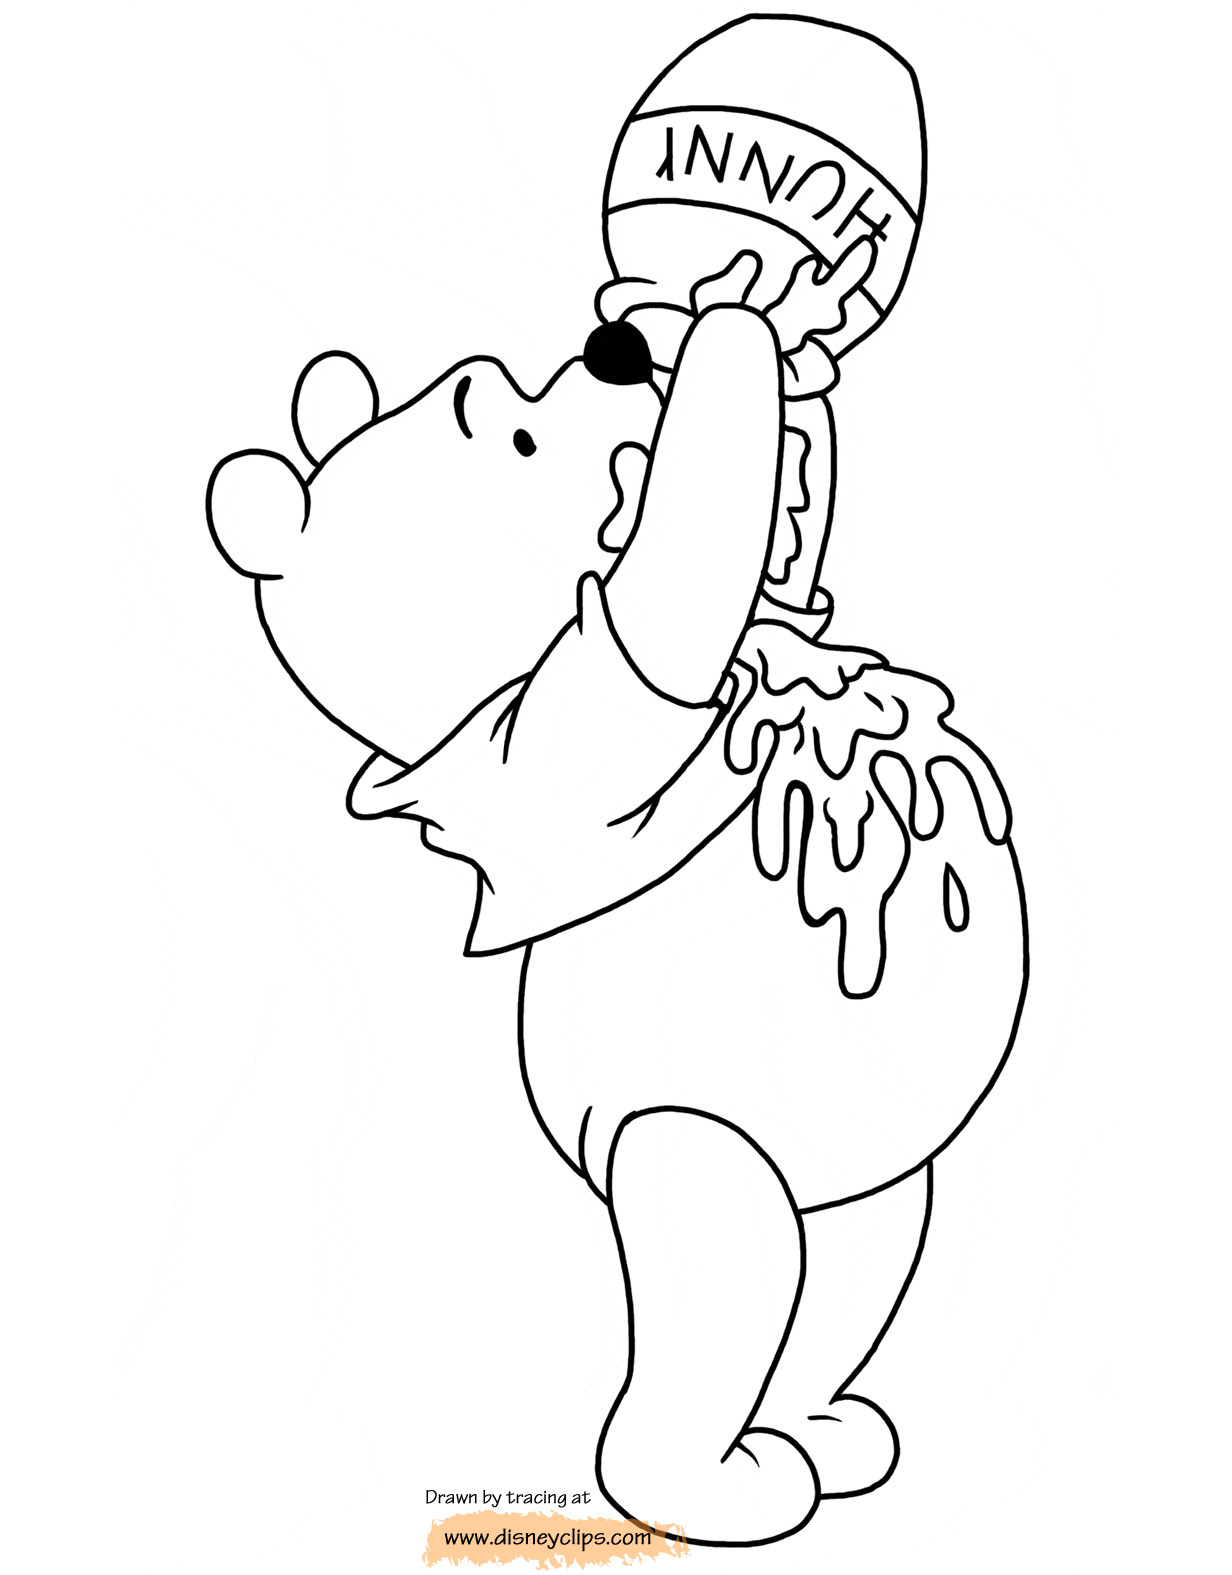 Winnie the Pooh Coloring Pages 2 | Disney's World of Wonders